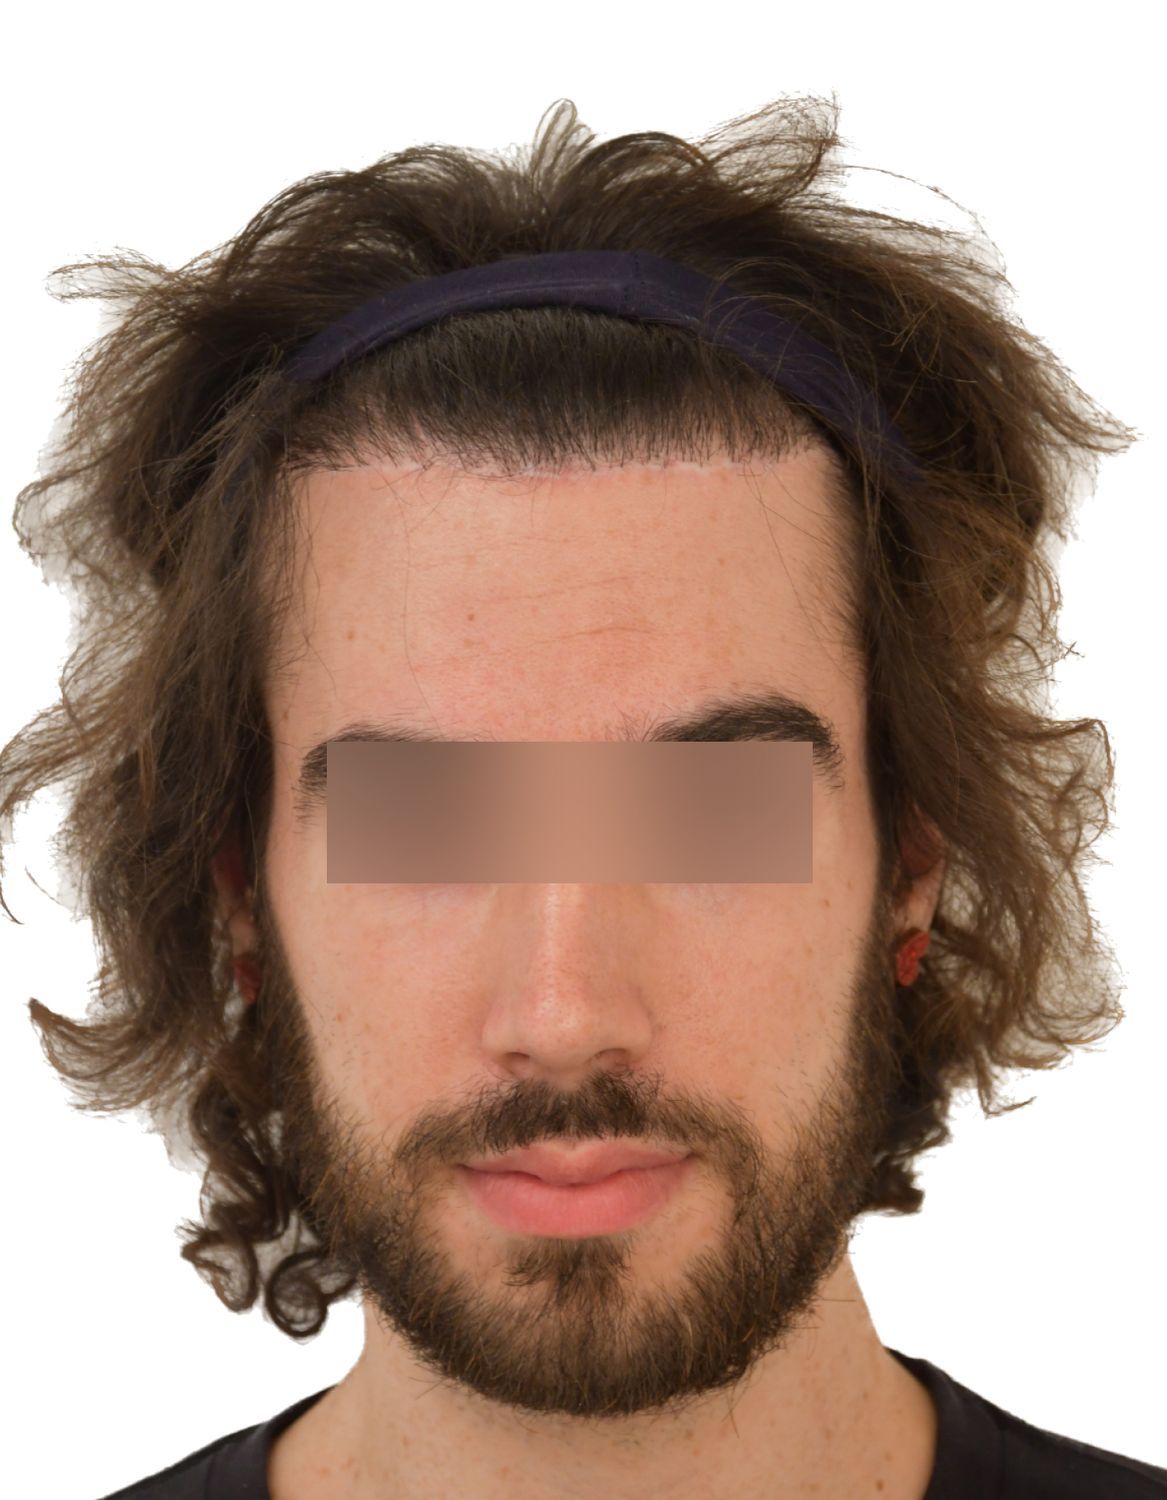 Forehead Reduction Surgery After